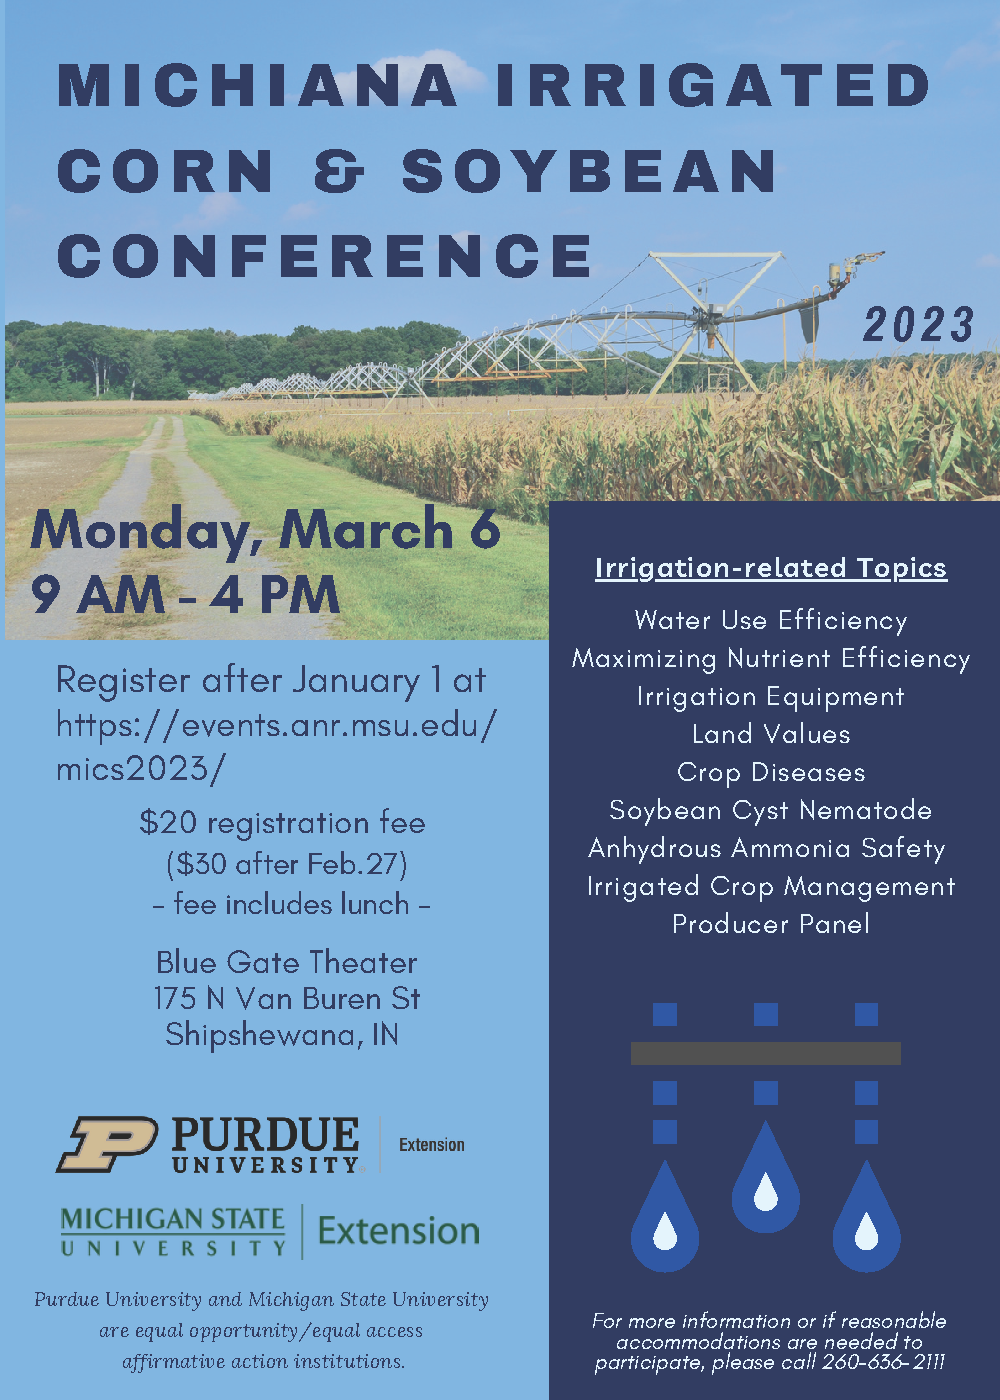 2023-michiana-irrigated-conf-3_page_1.png